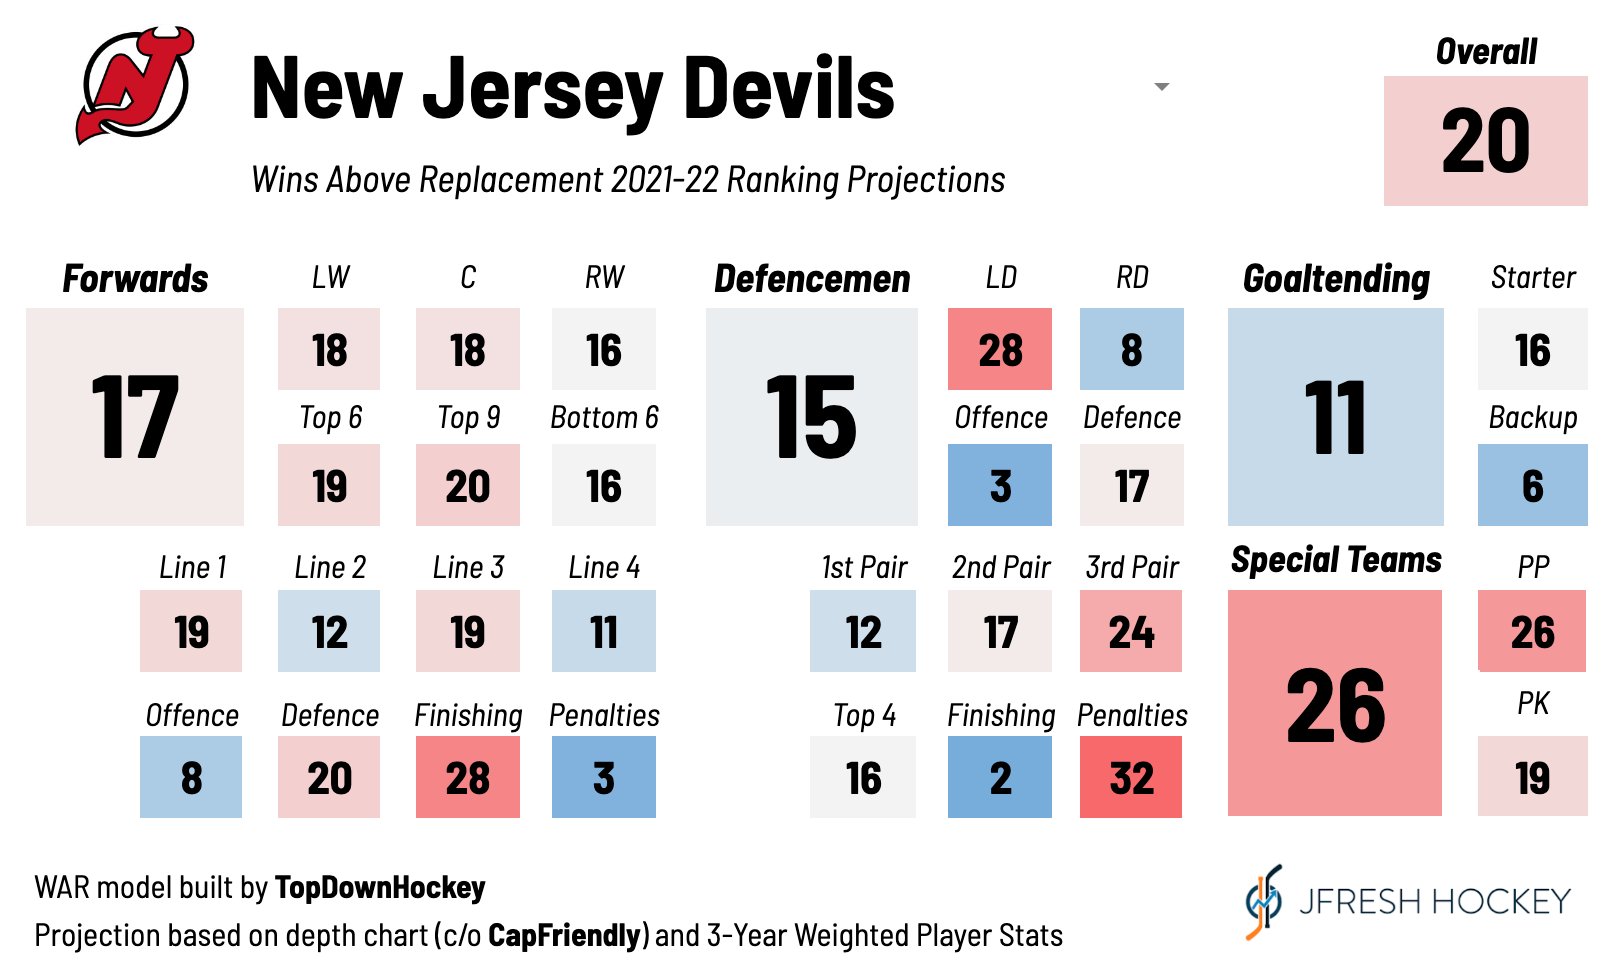 JFresh on X: "Season Preview: New Jersey Devils The Devils should be a lot  of fun to watch this year, with plenty of offensive talent. The big  challenges will be finishing their